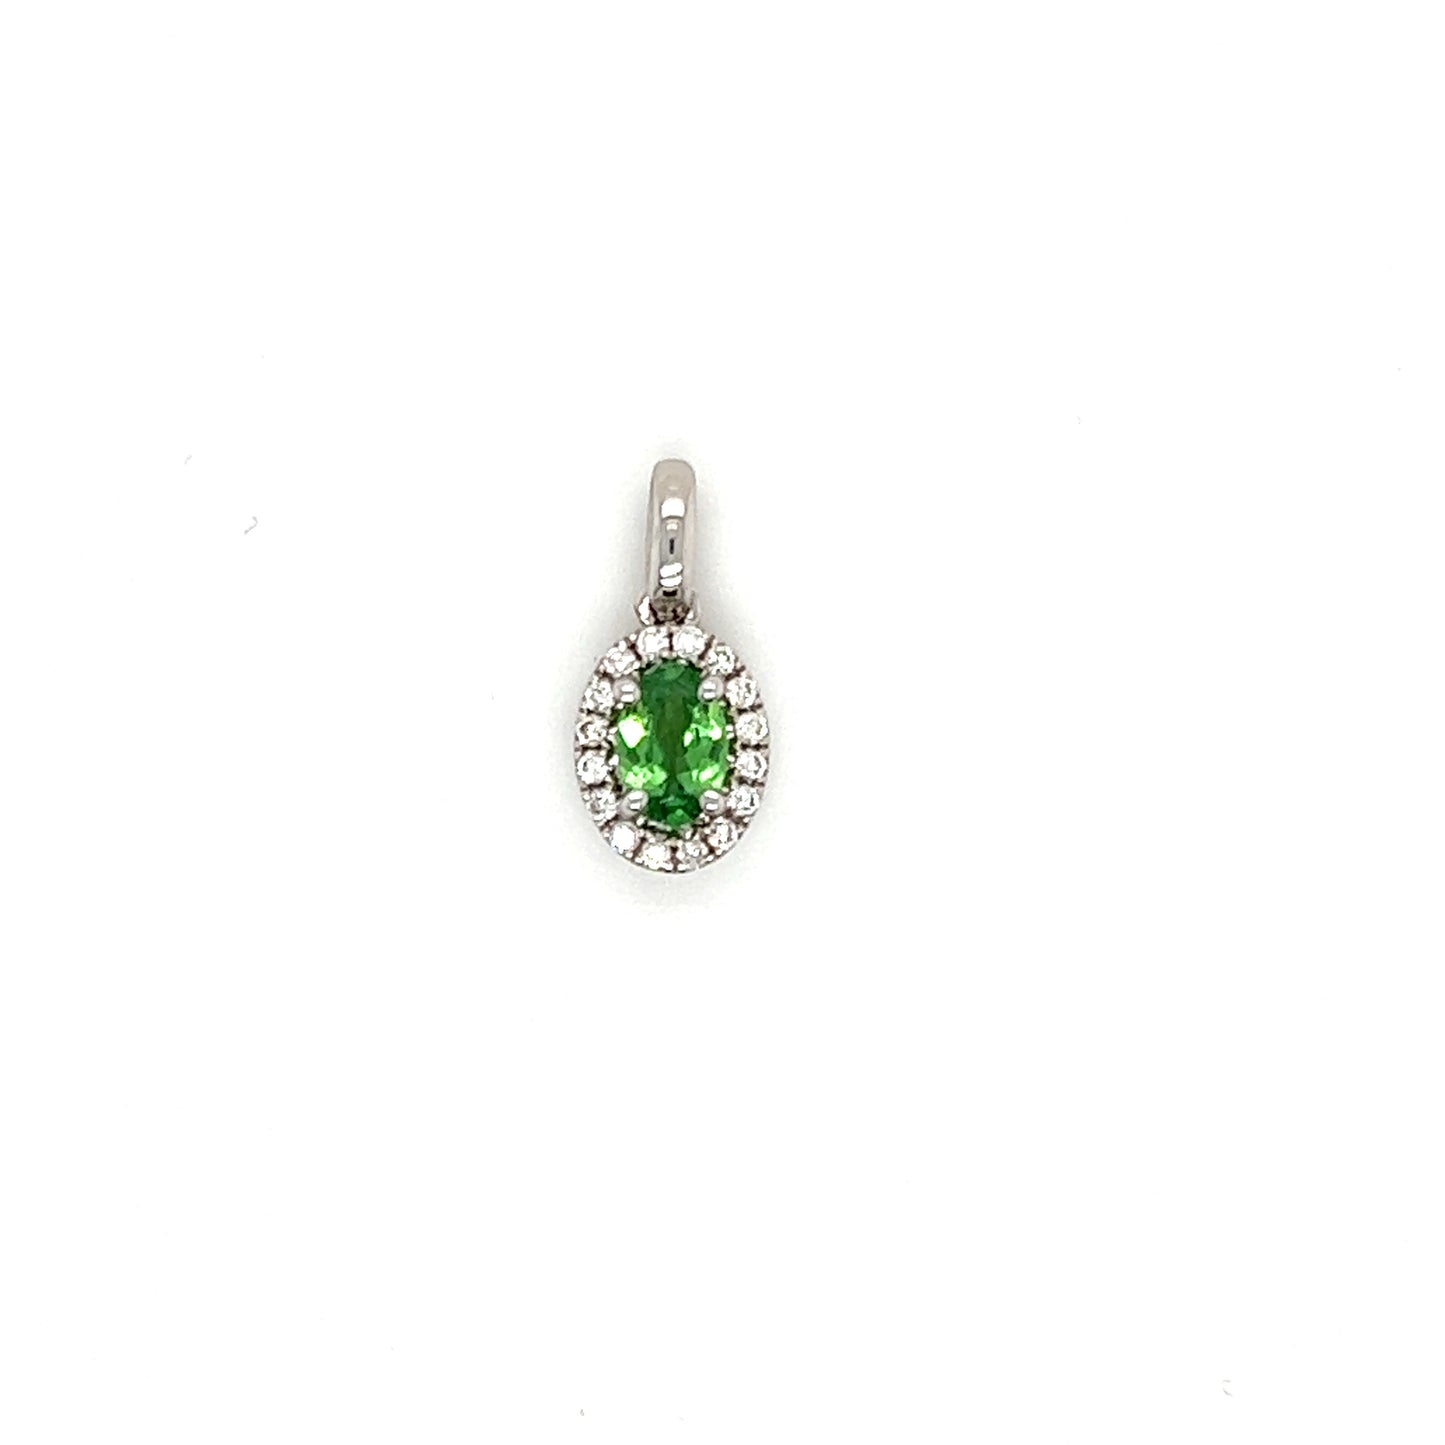 Oval Tsavorite Pendant with Diamond Halo in 14K White Gold Front View